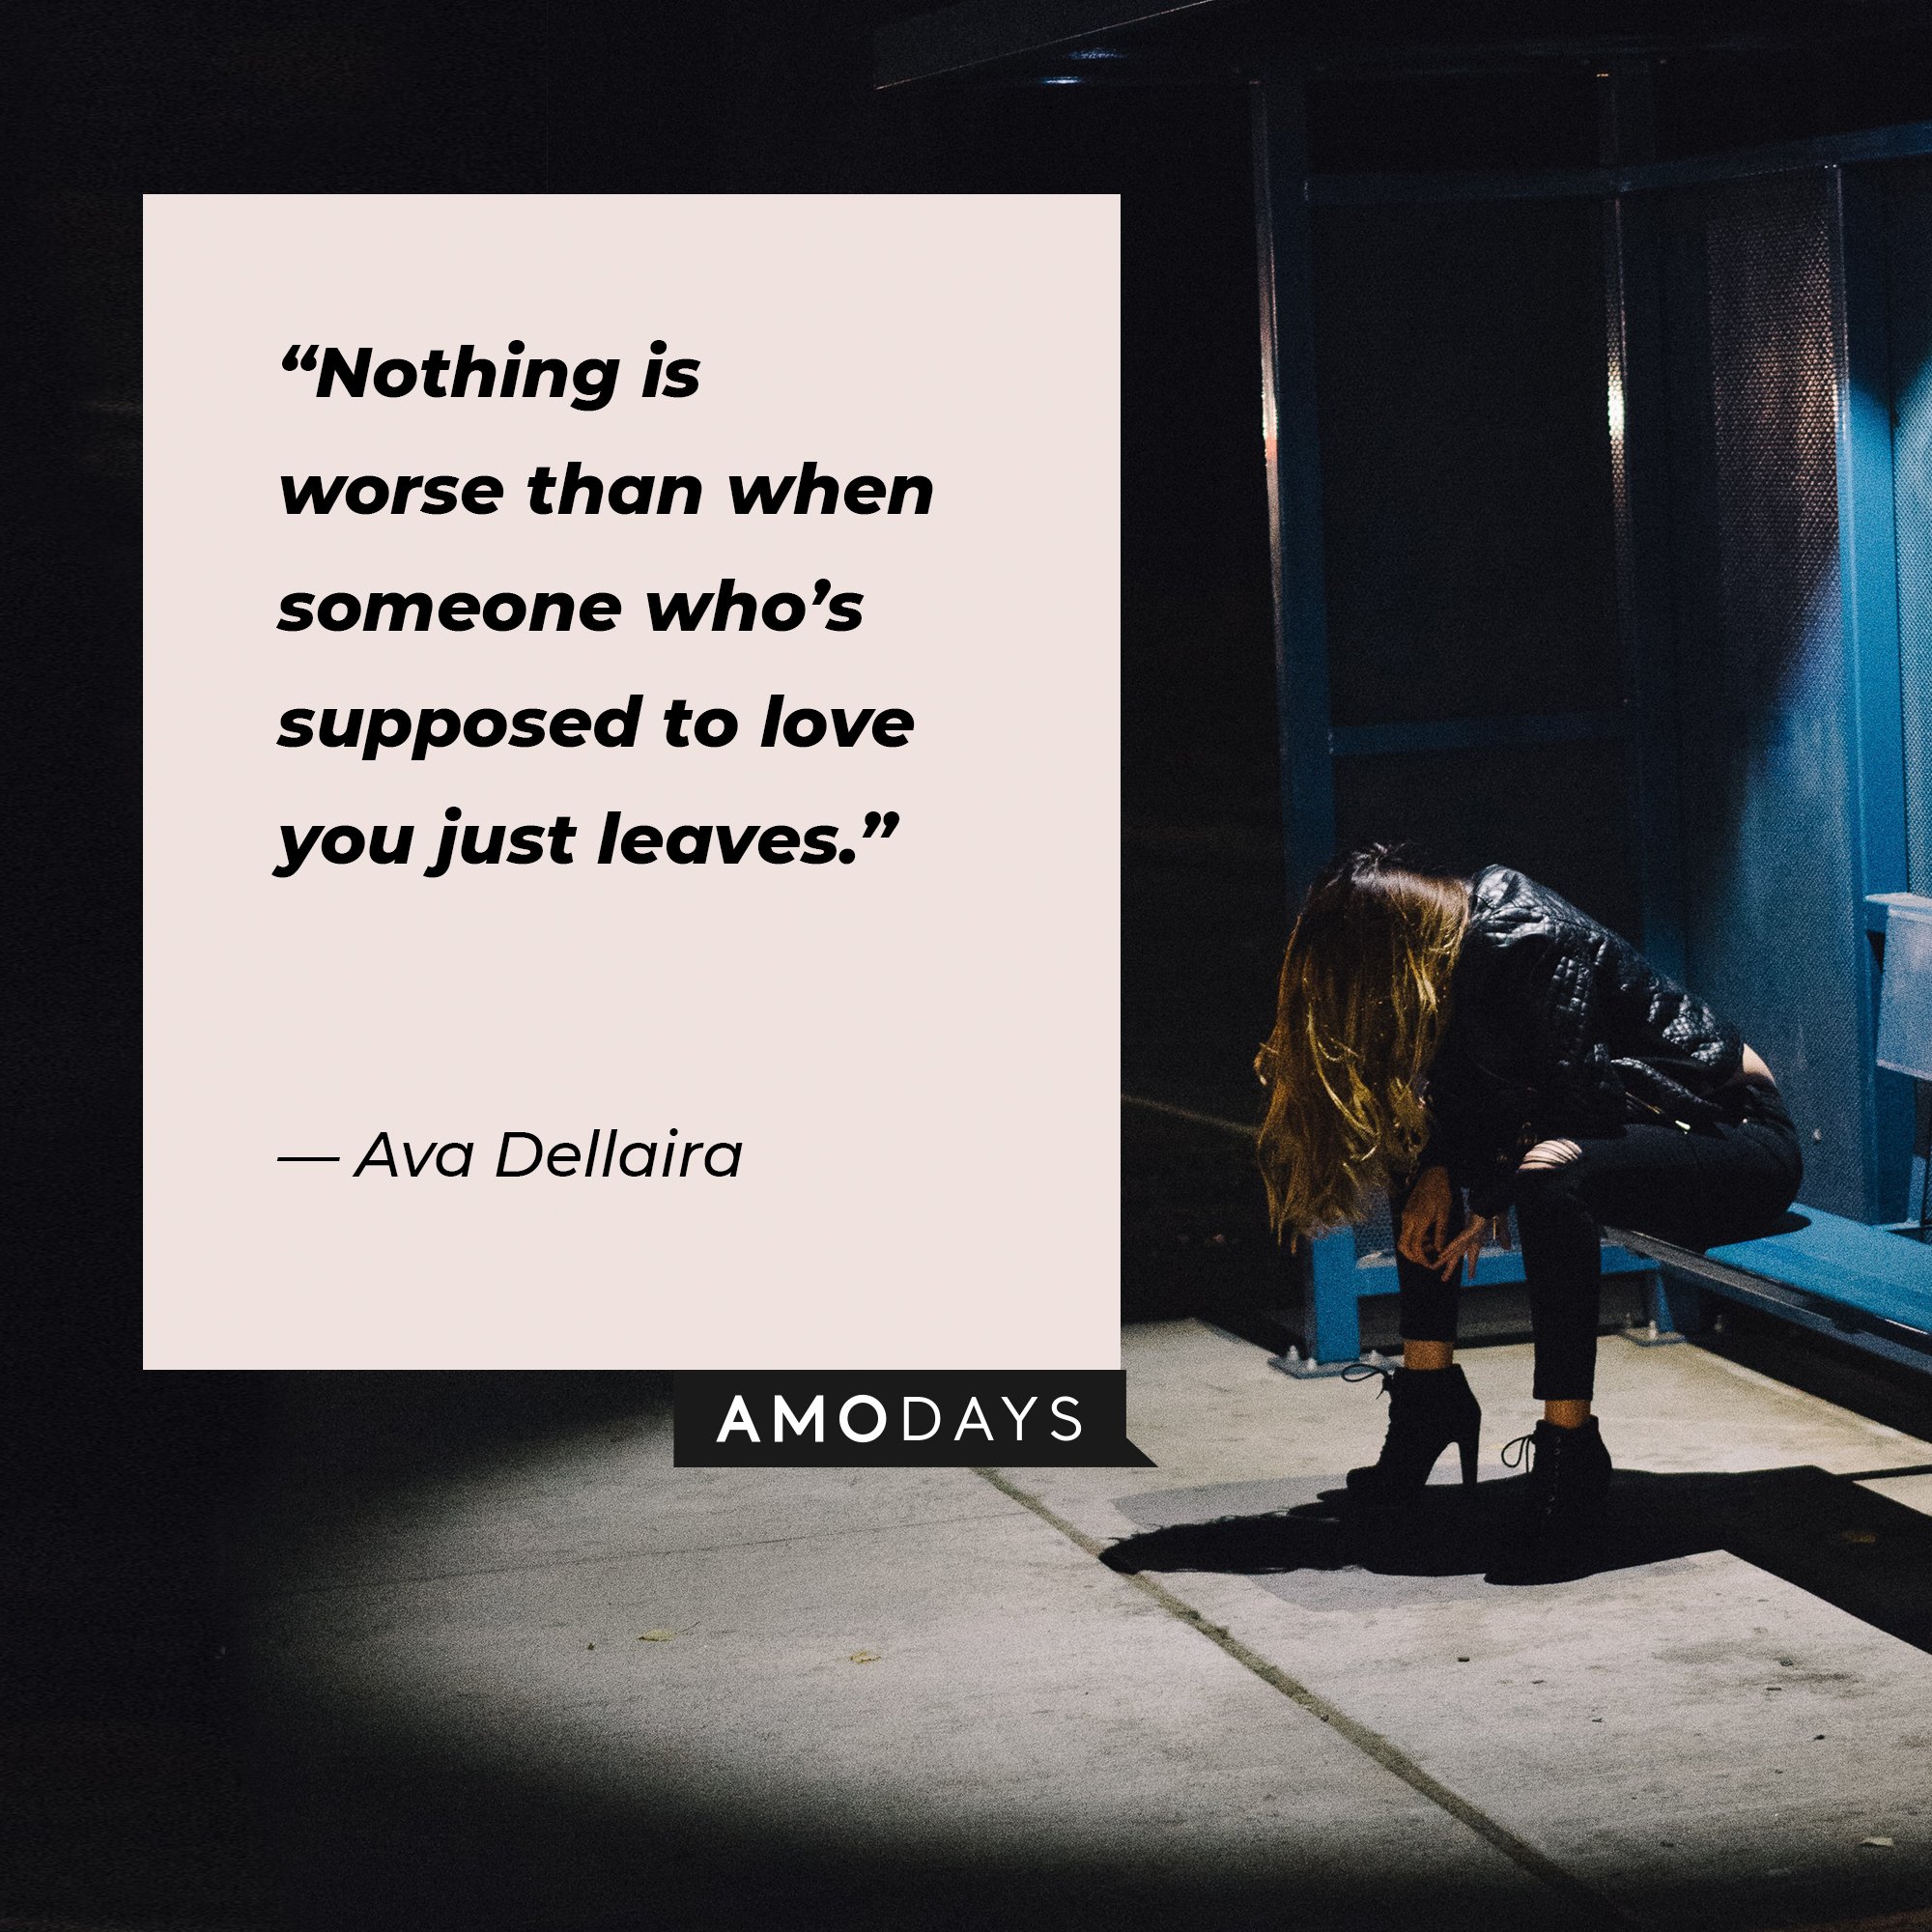 Ava Dellaira’s quote:“Nothing is worse than when someone who’s supposed to love you just leaves.” | Image: AmoDays